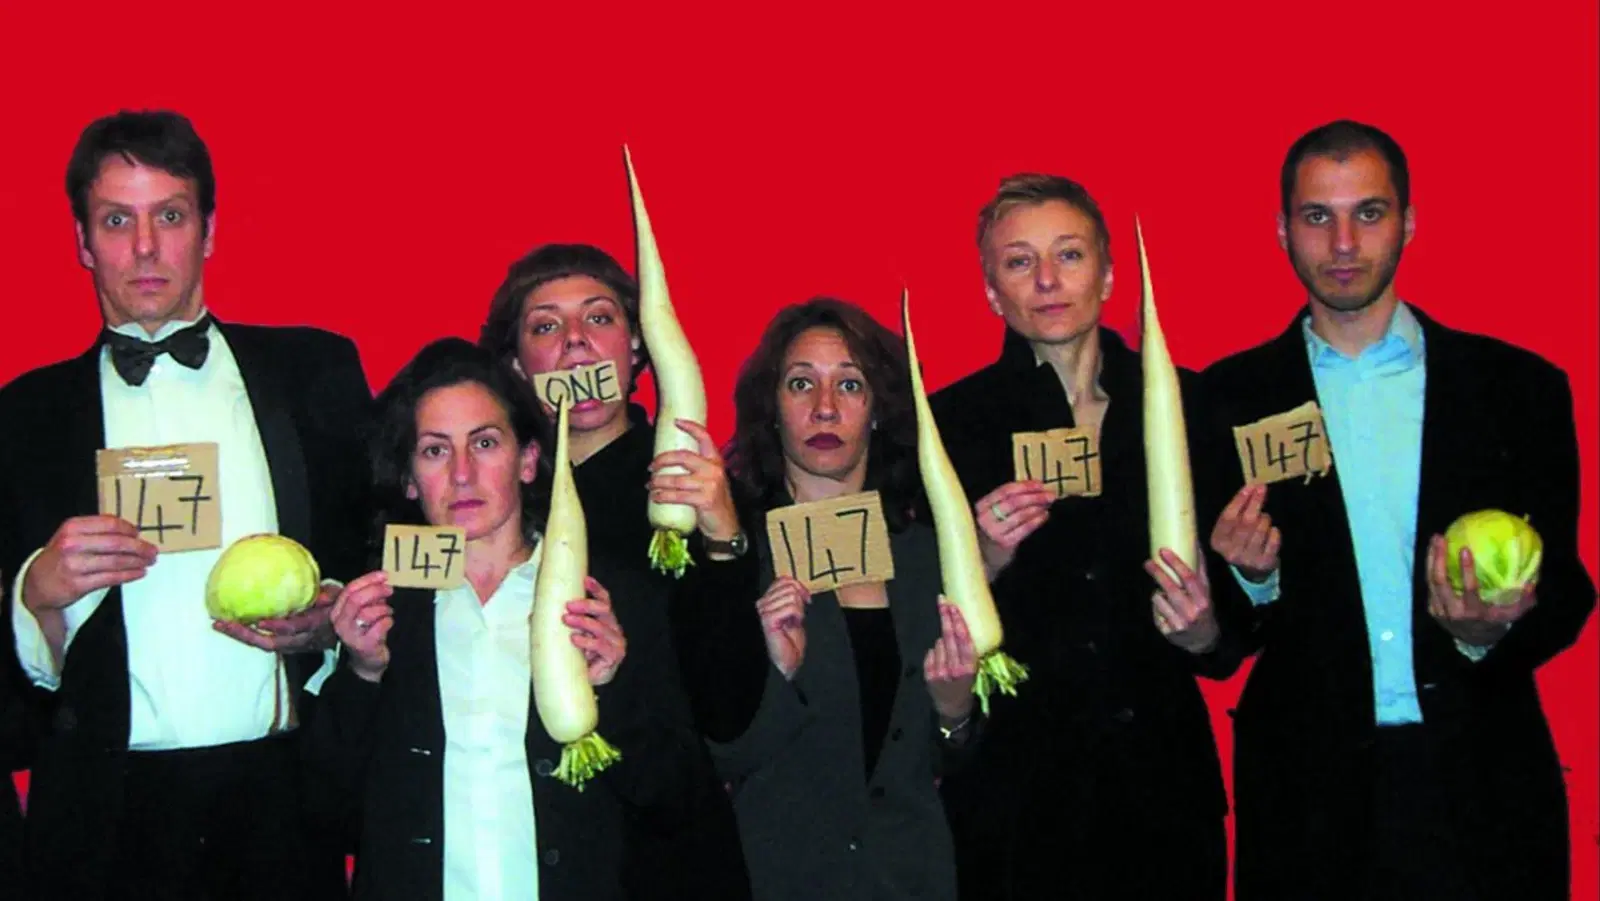 A group of six people holding vegetables and displaying numbers on cards, with puzzled expressions against a red background.